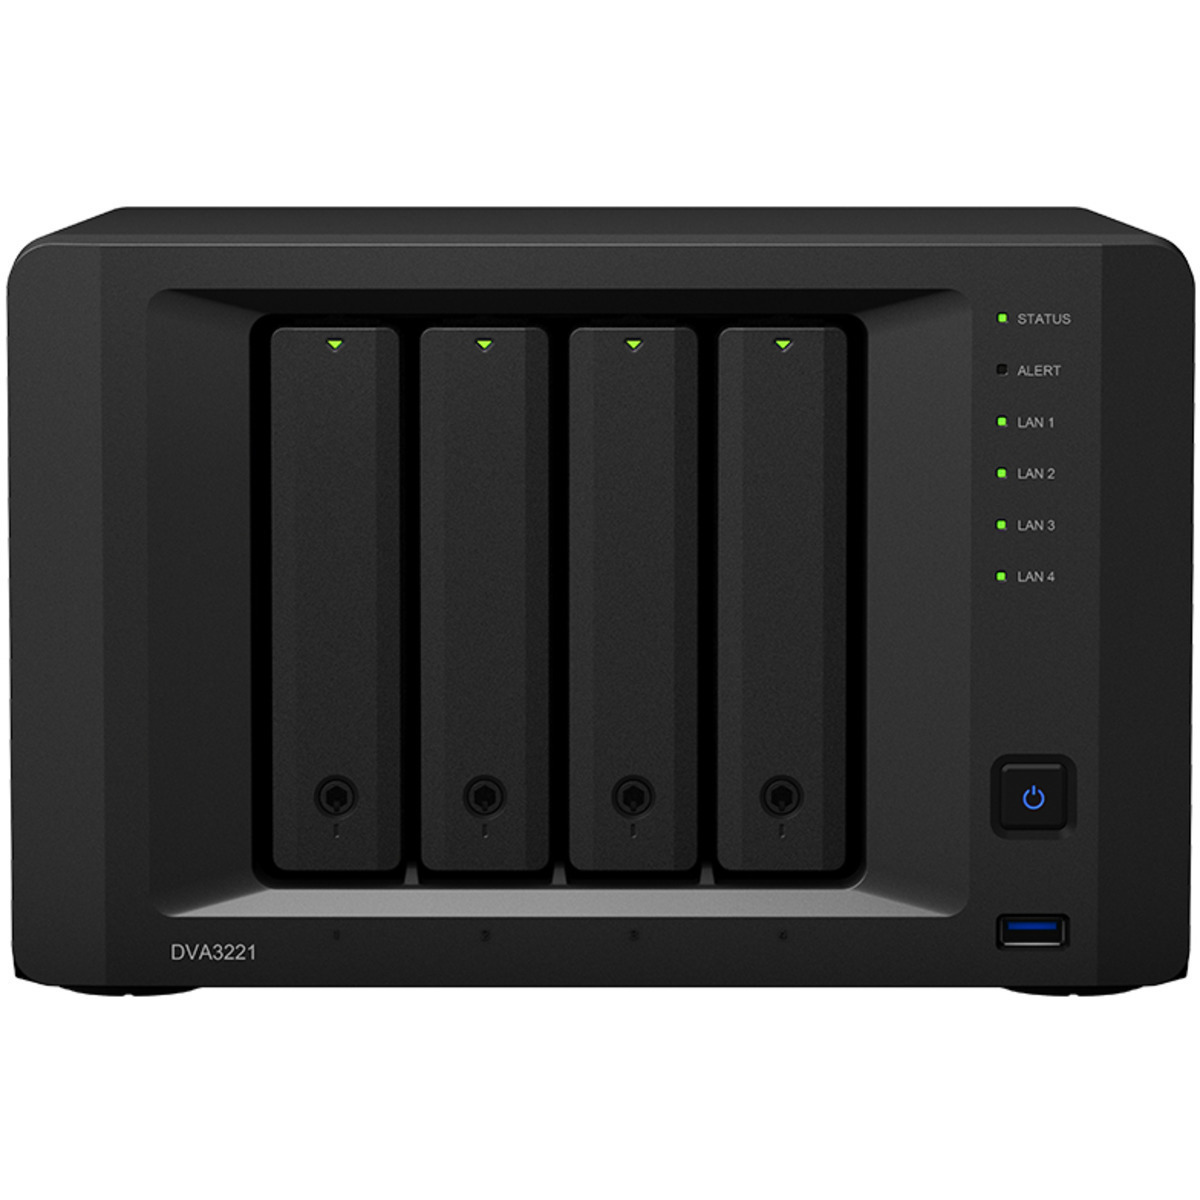 buy $3442 Synology DVA3221 DVR 8tb Desktop NVR - Network Video Recorder 4x2000gb Seagate BarraCuda ST2000DM008 3.5 7200rpm SATA 6Gb/s HDD CONSUMER Class Drives Installed - Burn-In Tested - ON SALE - nas headquarters buy network attached storage server device das new raid-5 free shipping usa christmas new year holiday sale DVA3221 DVR